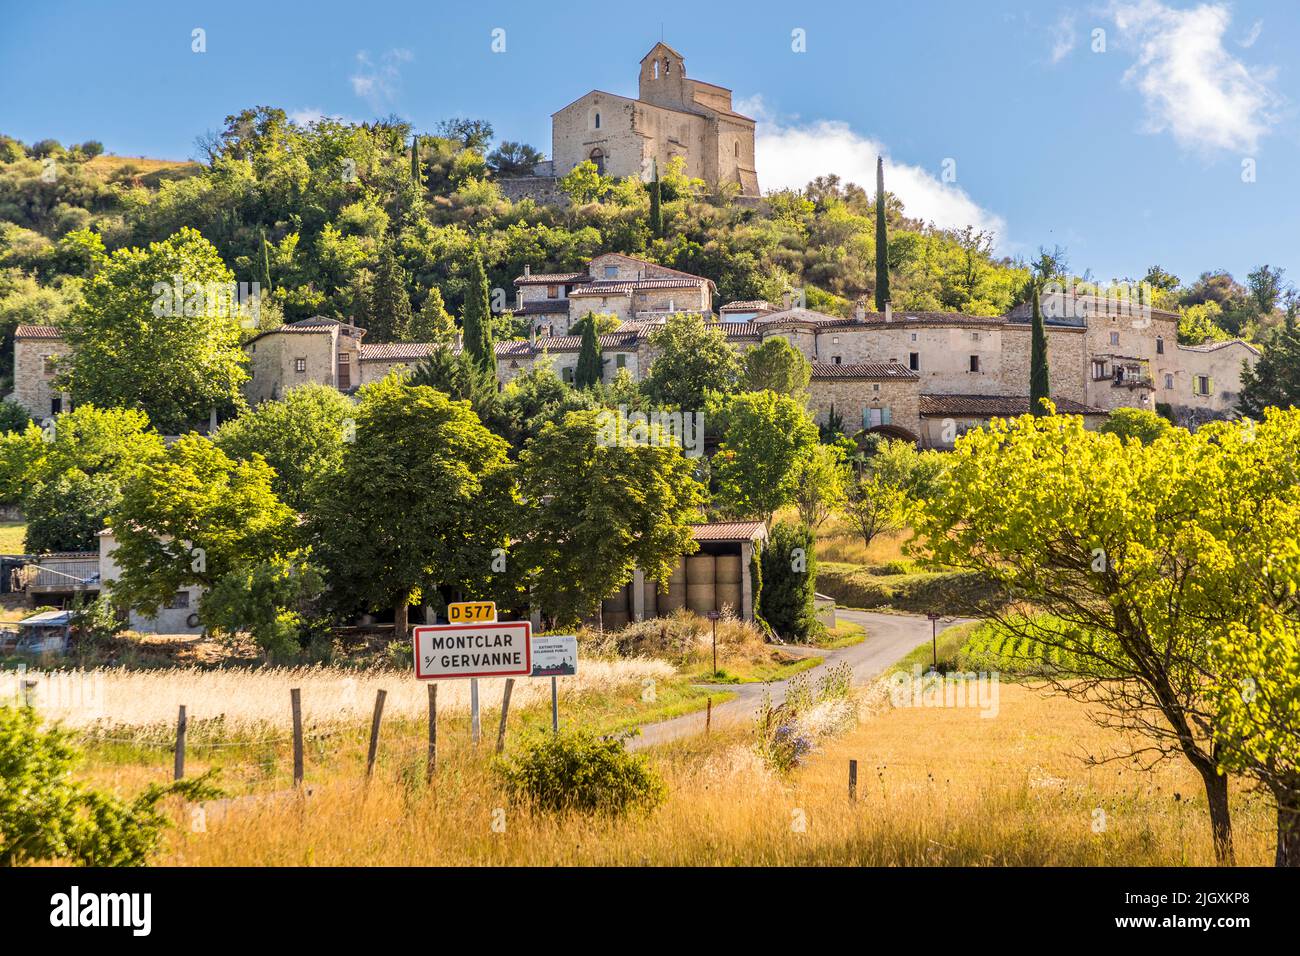 Montclar-sur-Gervanne belongs to the Villages perchés. These fortified settlements from the Middle Ages, which are by nature difficult to access and often have ramparts, are typical of Provence in the southwest of France Stock Photo